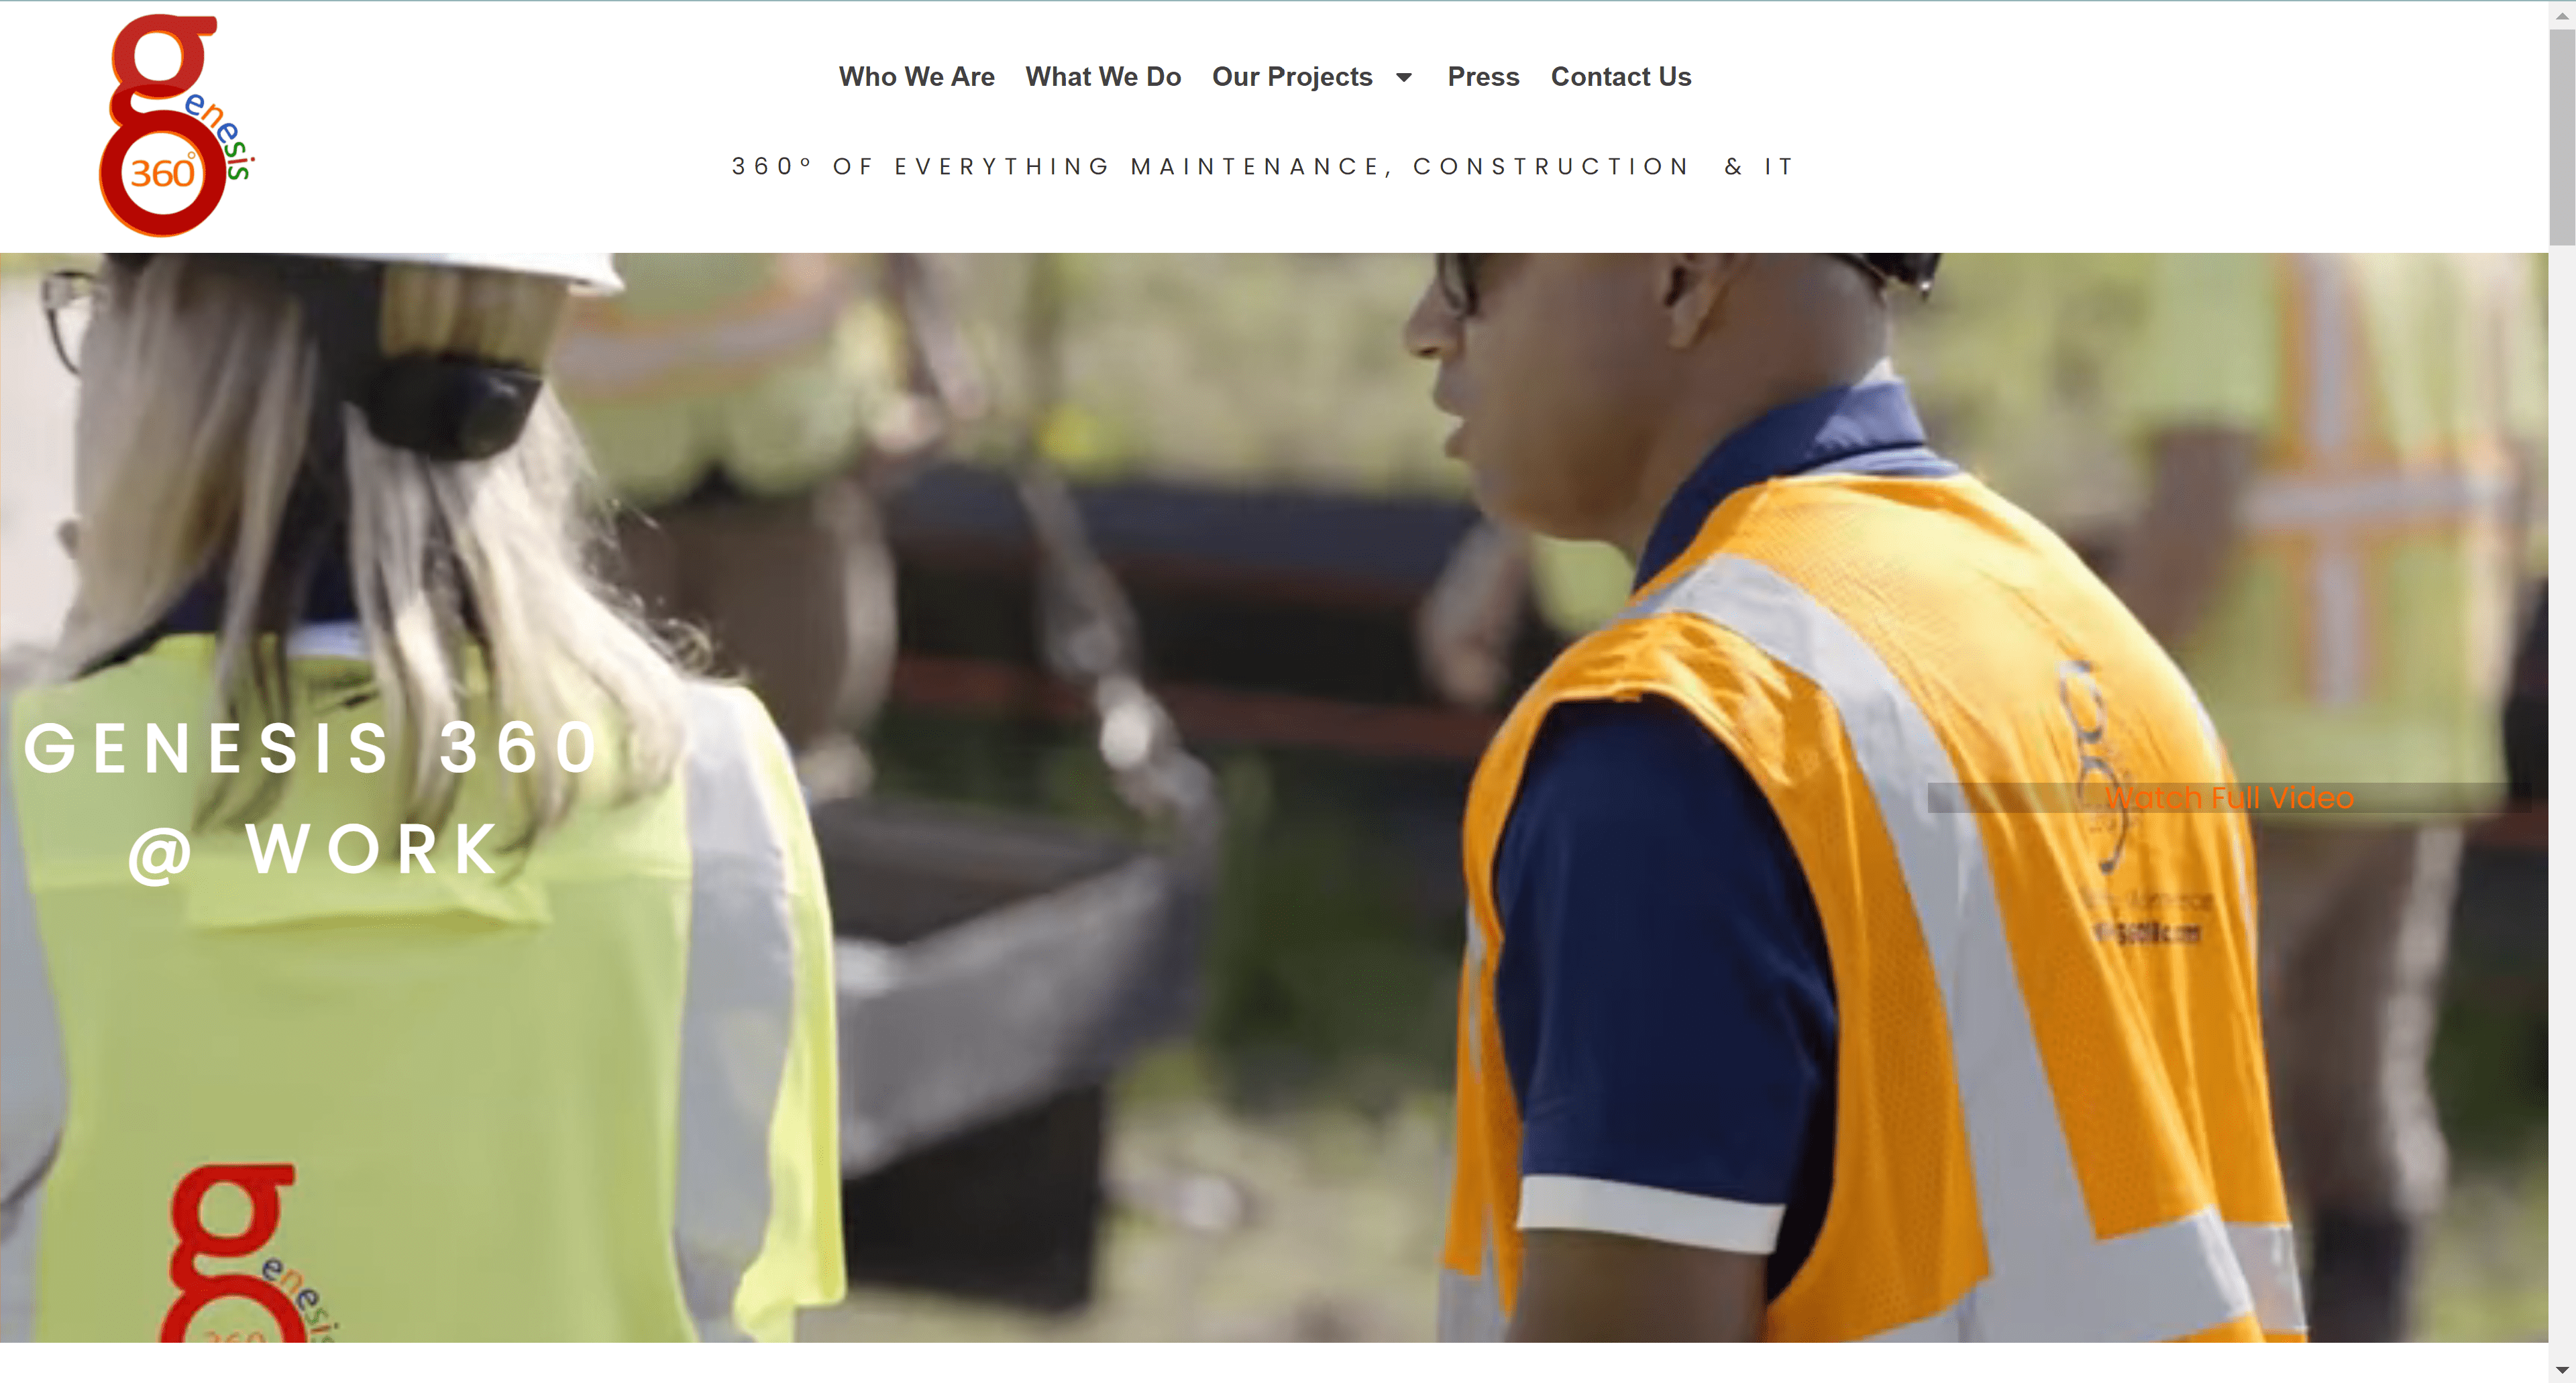 The home page opens with a video of work on a major construction site and showcases Genesis services, parnerships, previous clients, and achievements.